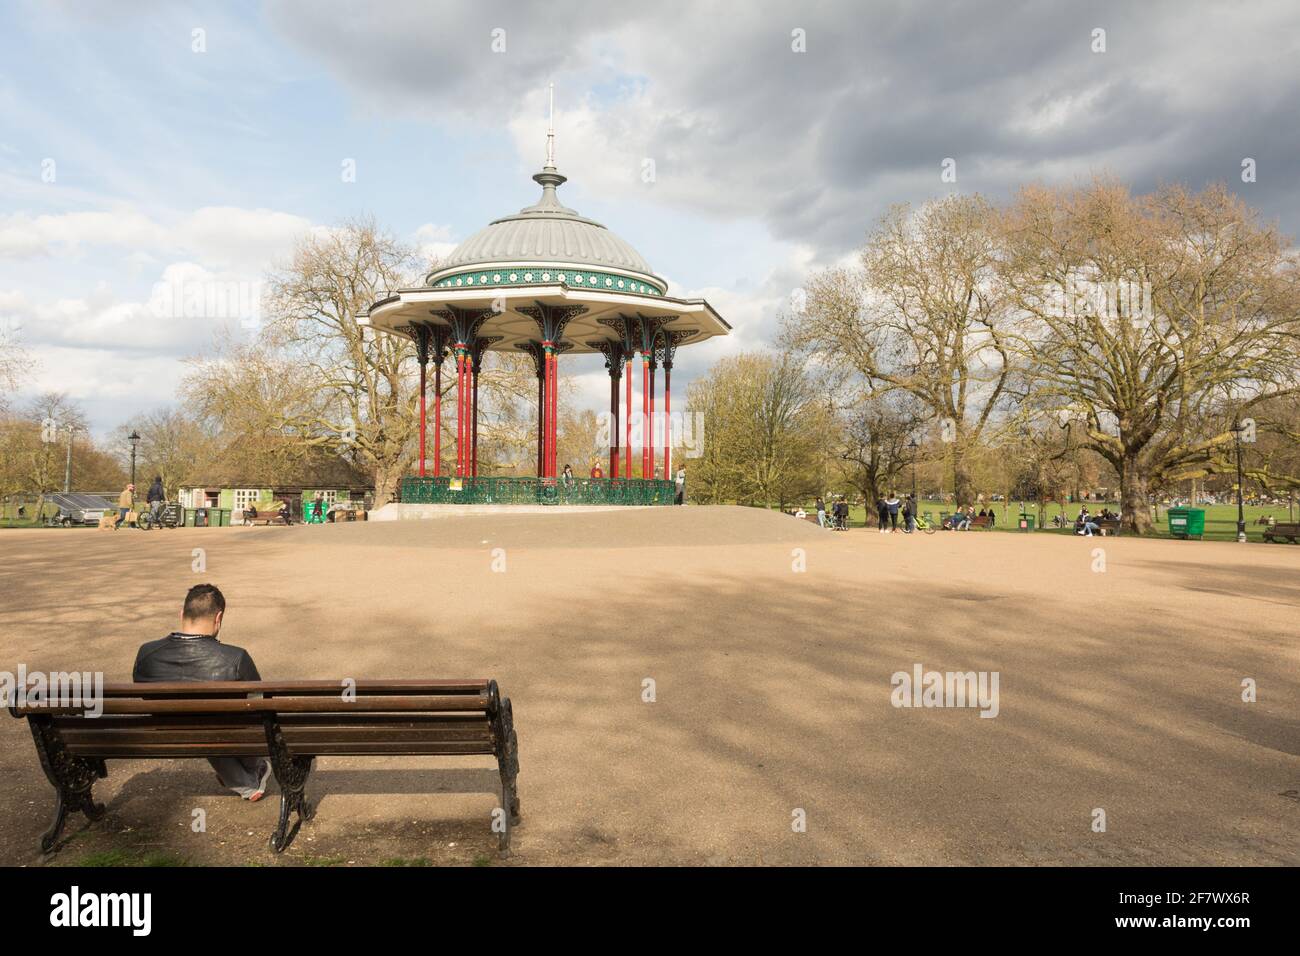 A young man sitting on a park bench next to Clapham Common Bandstand, Windmill Drive, Clapham Common, Clapham, SW4, London, England, U.K. Stock Photo